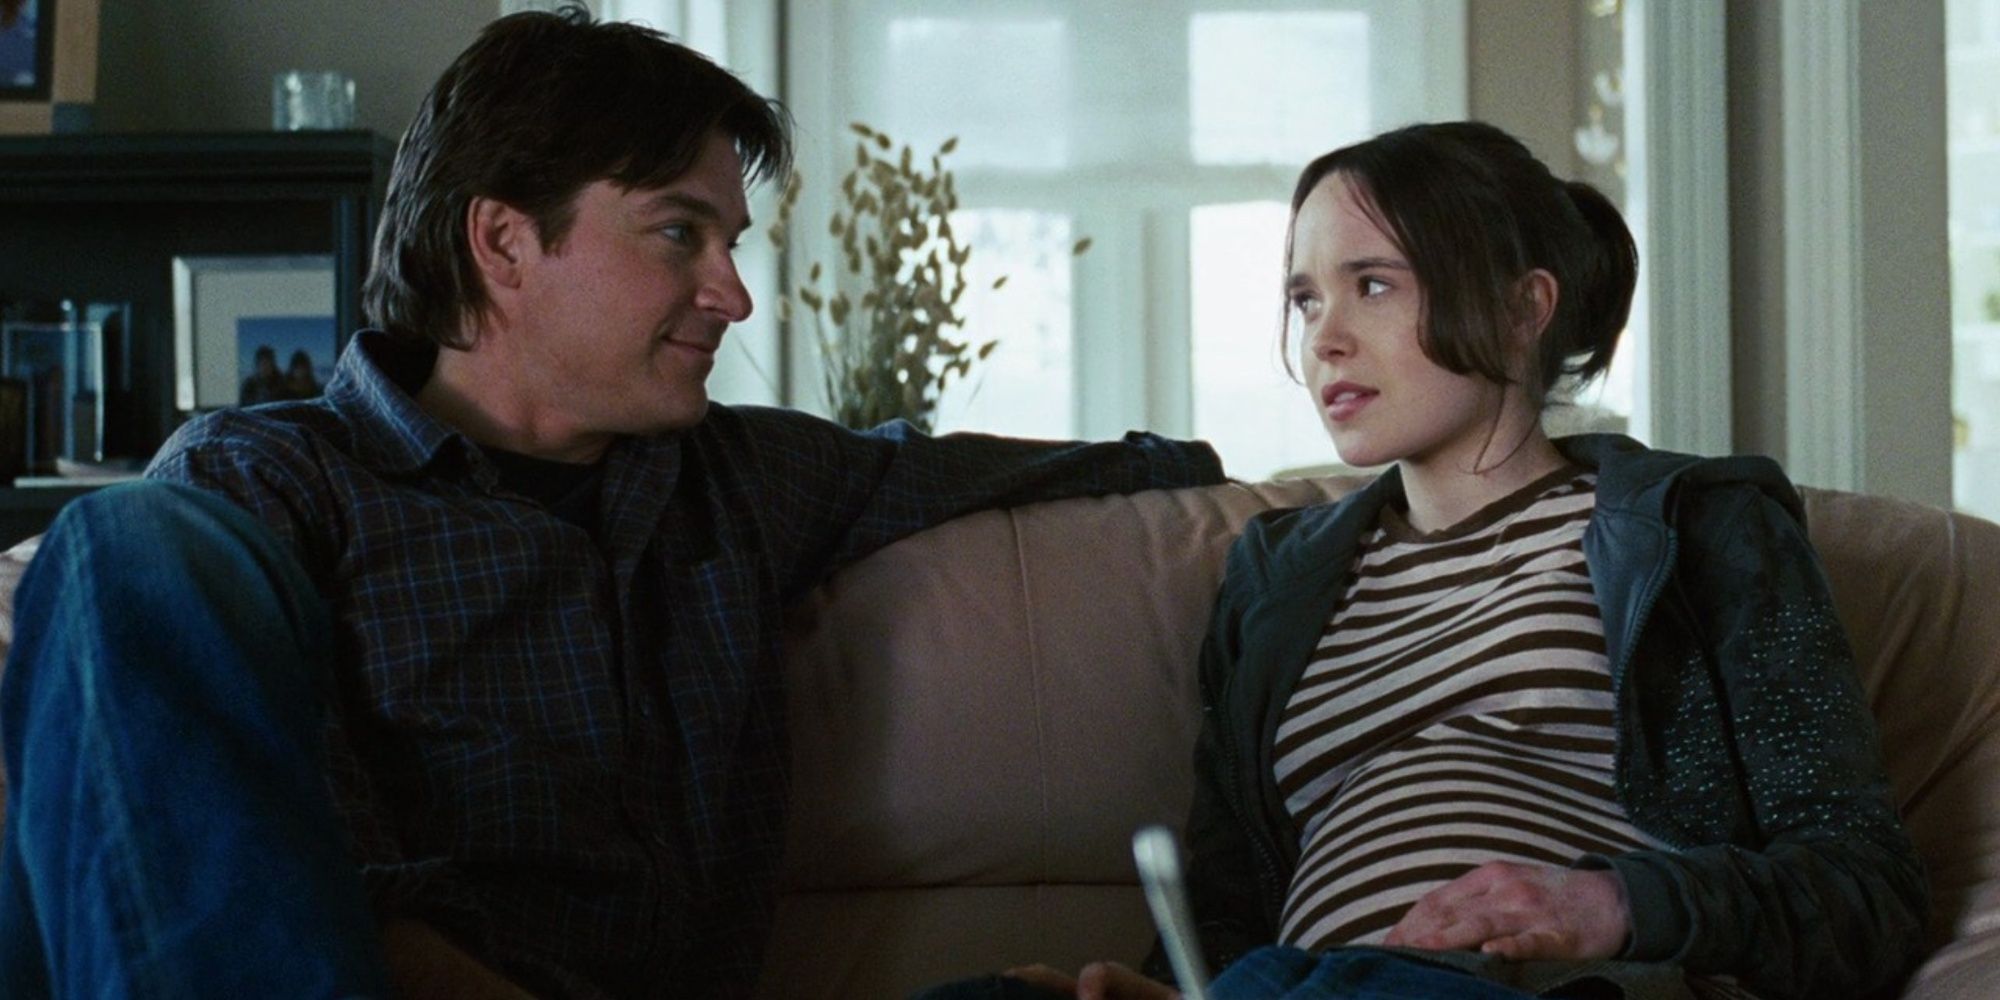 Jason Bateman and Elliot Page as Mark and Juno talking while sitting on the couch in Juno.